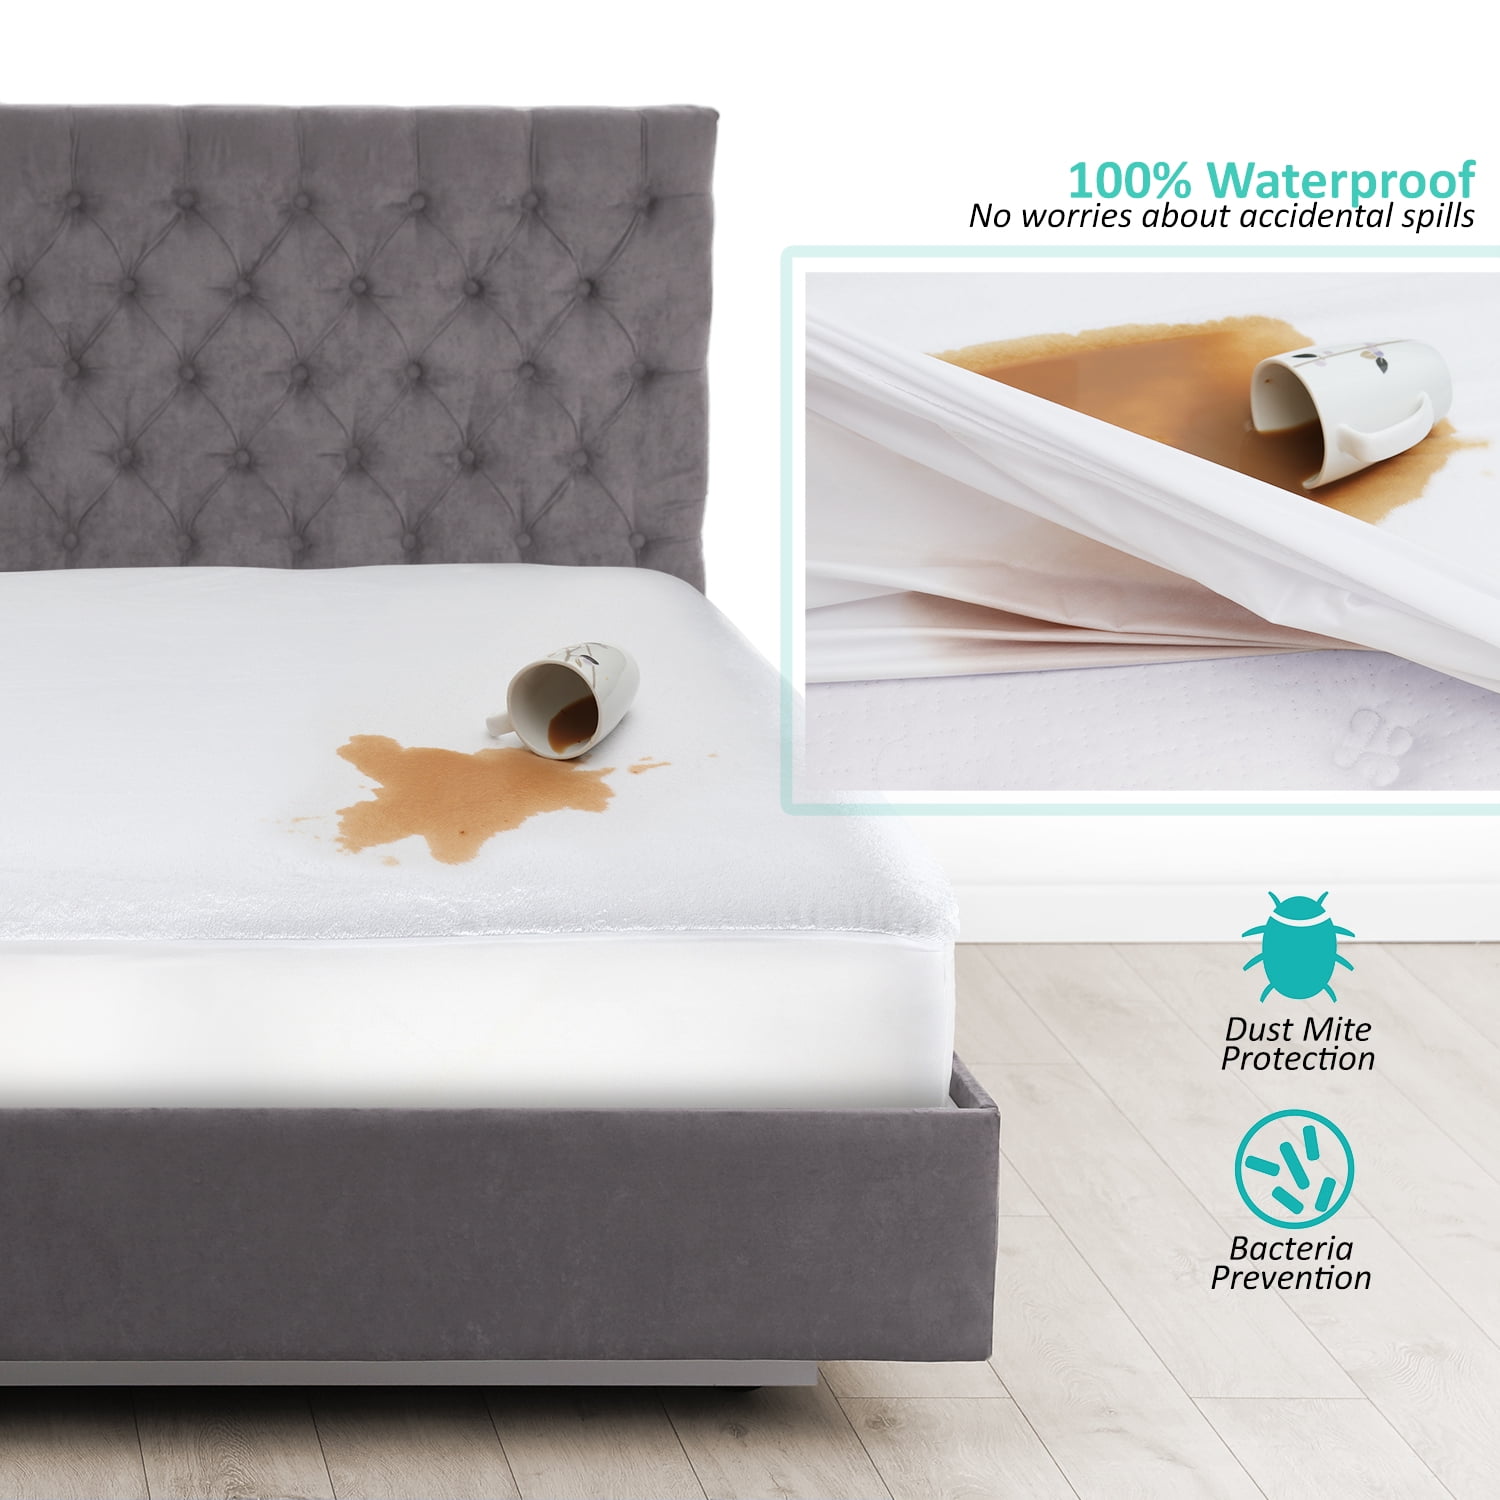 Doqu Home Cooler and Stress-Free Mattress Protector Waterproof 100%, Size: Queen